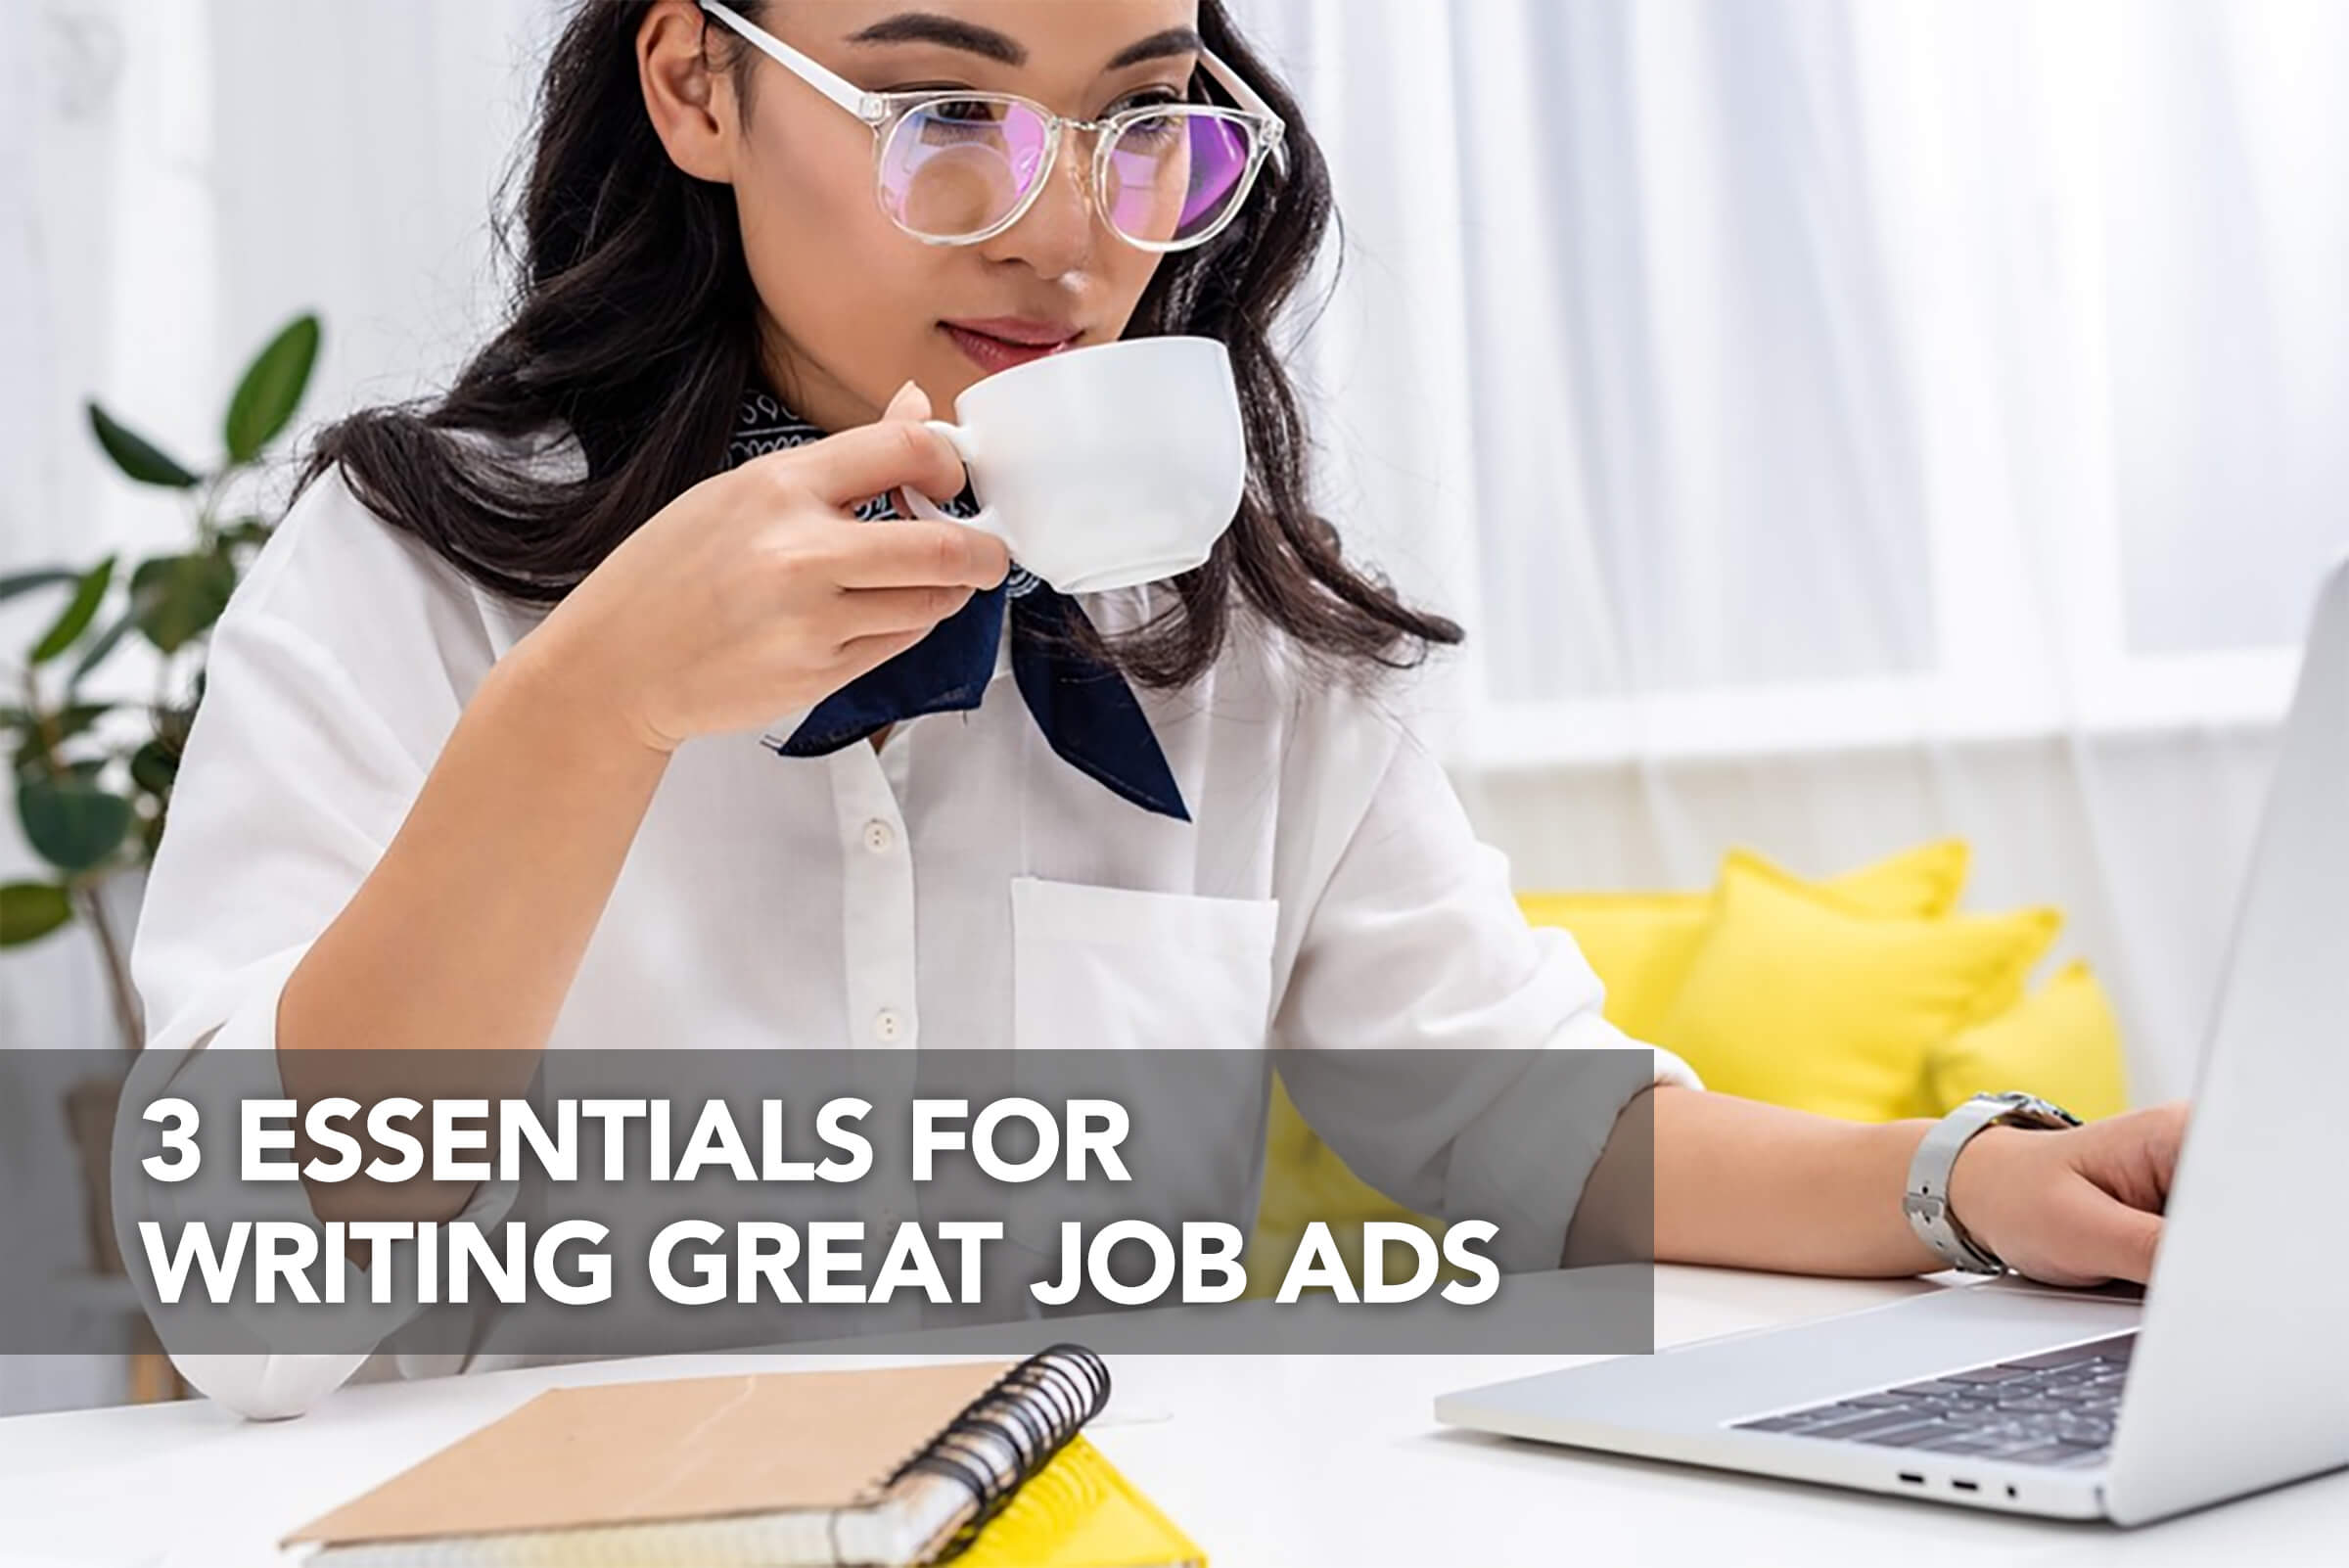 3 Essentials For Writing Great Job Ads